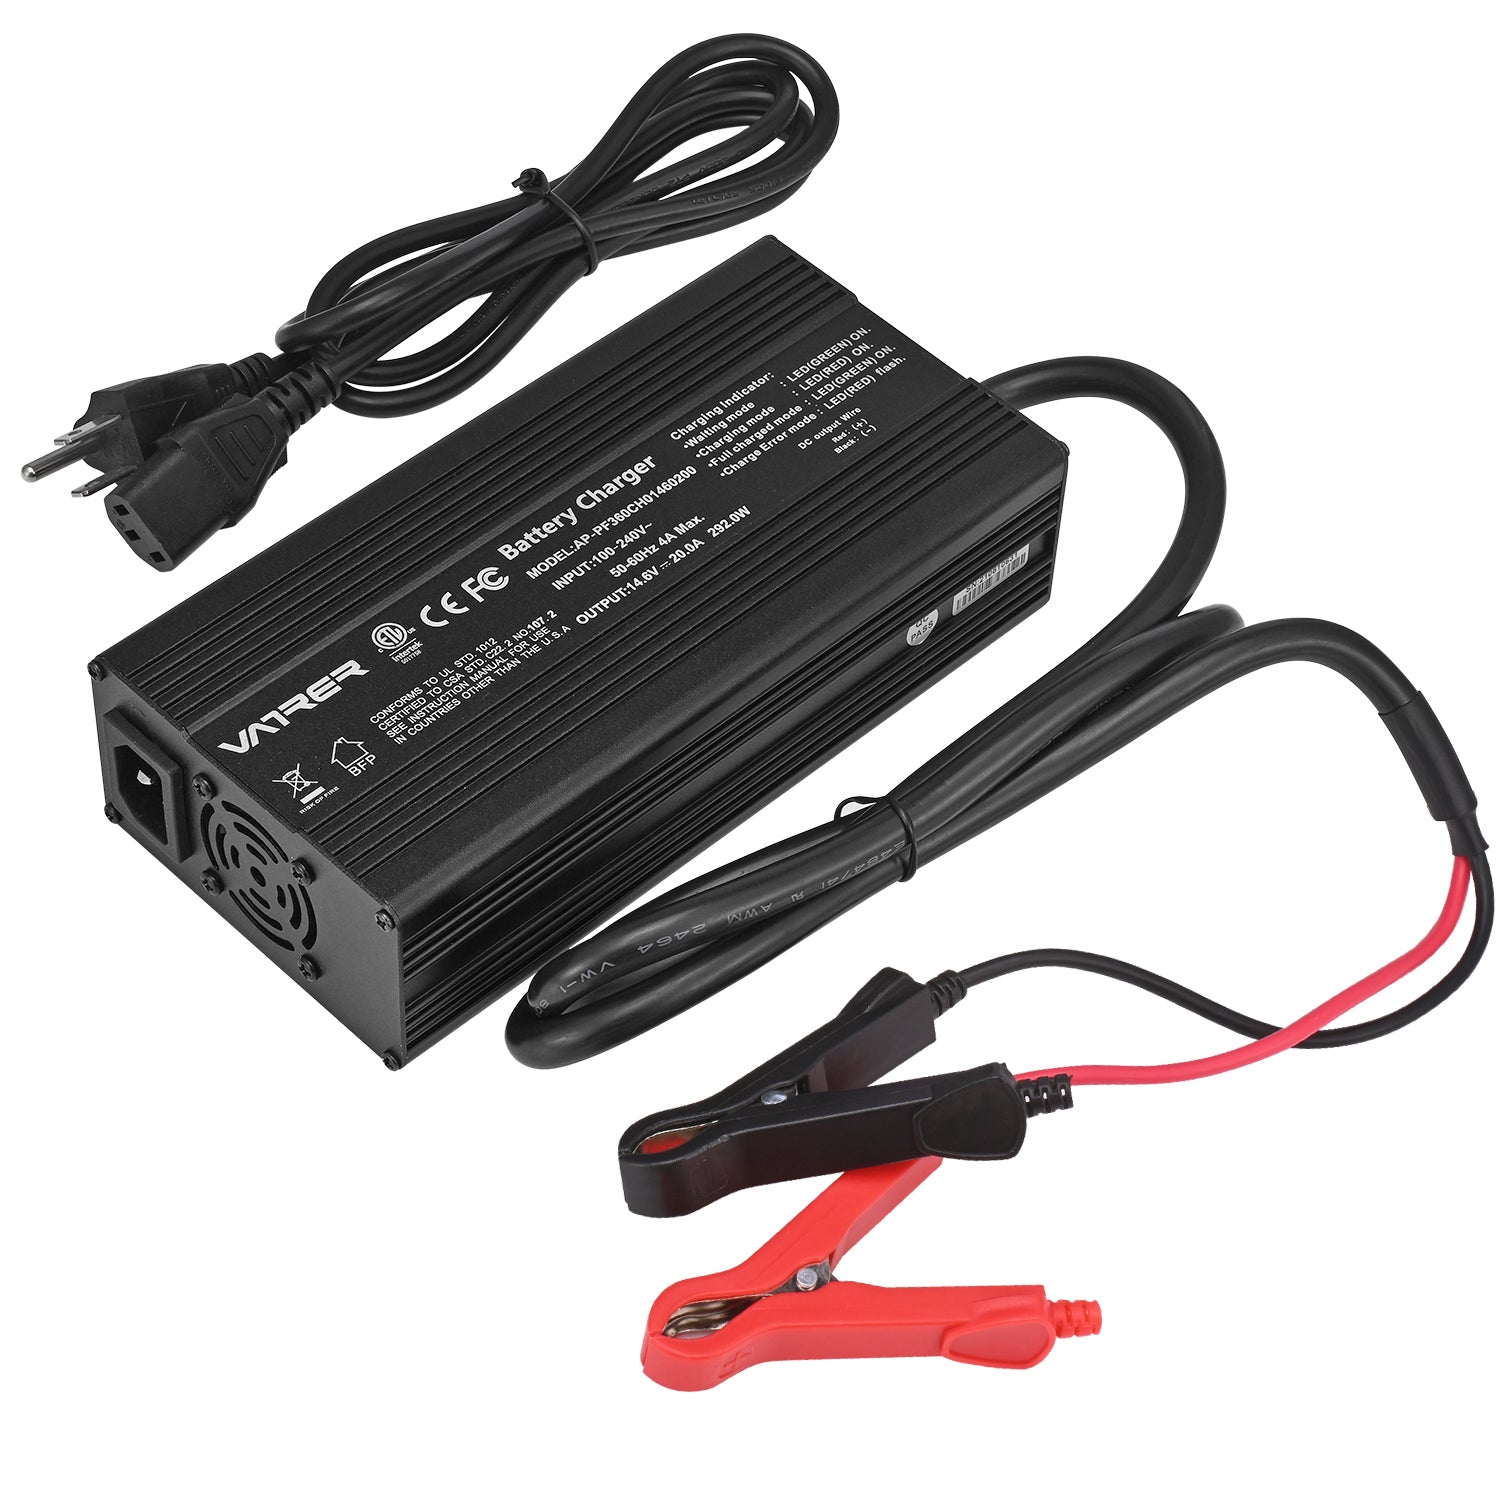 14.6V 20A Intelligent AC-DC 12V Lithium Iron Phosphate Battery Charger 12